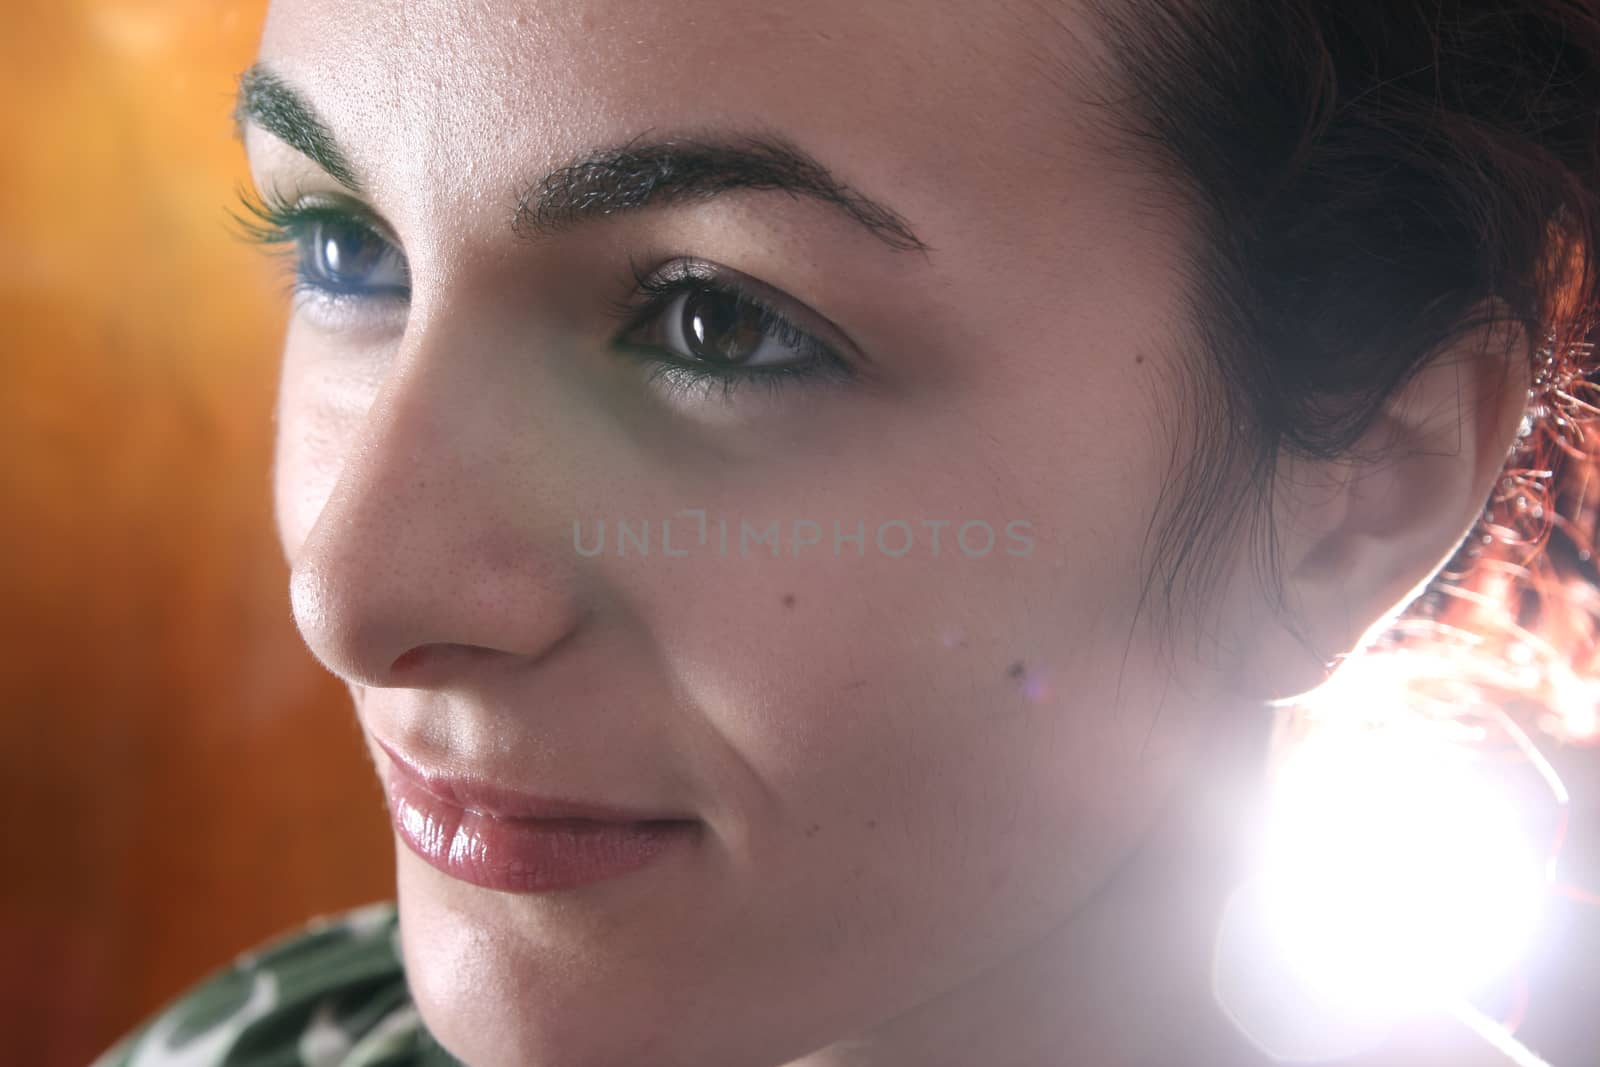 Beautiful face of woman. For more photos with this model fell free to visit my portfolio !